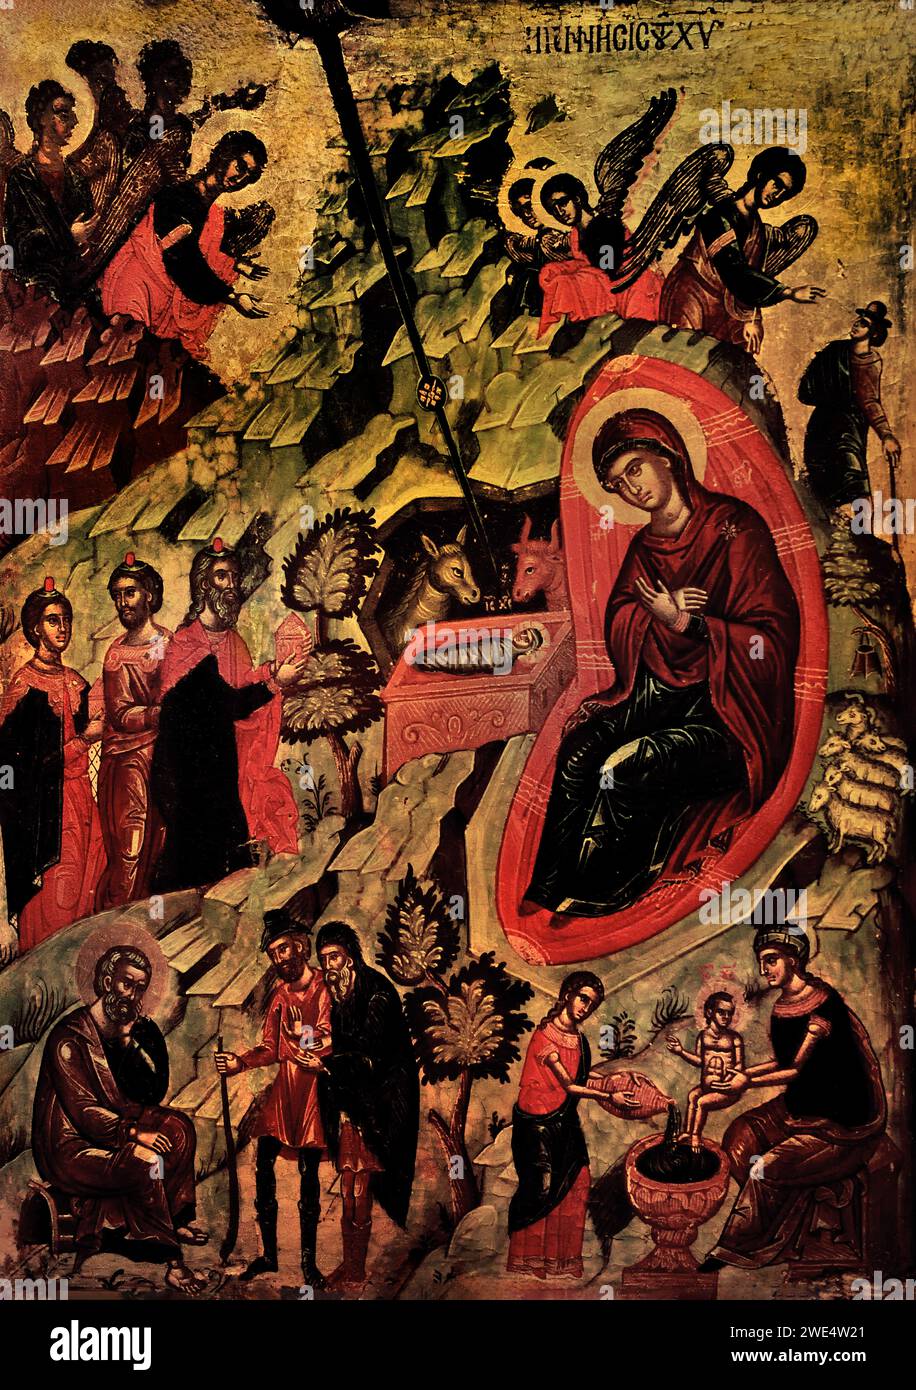 The Nativity 17th Century ( influence of Italian art Cretan Workshop, Benaki Museum Athens Greece. ( Adoration, Magi, Adoration of the Kings , Nativity of Jesus, Three Magi, represented as kings, found Jesus by following a star, lay before him gifts of gold, frankincense, and myrrh, and worship him,  ) Stock Photo